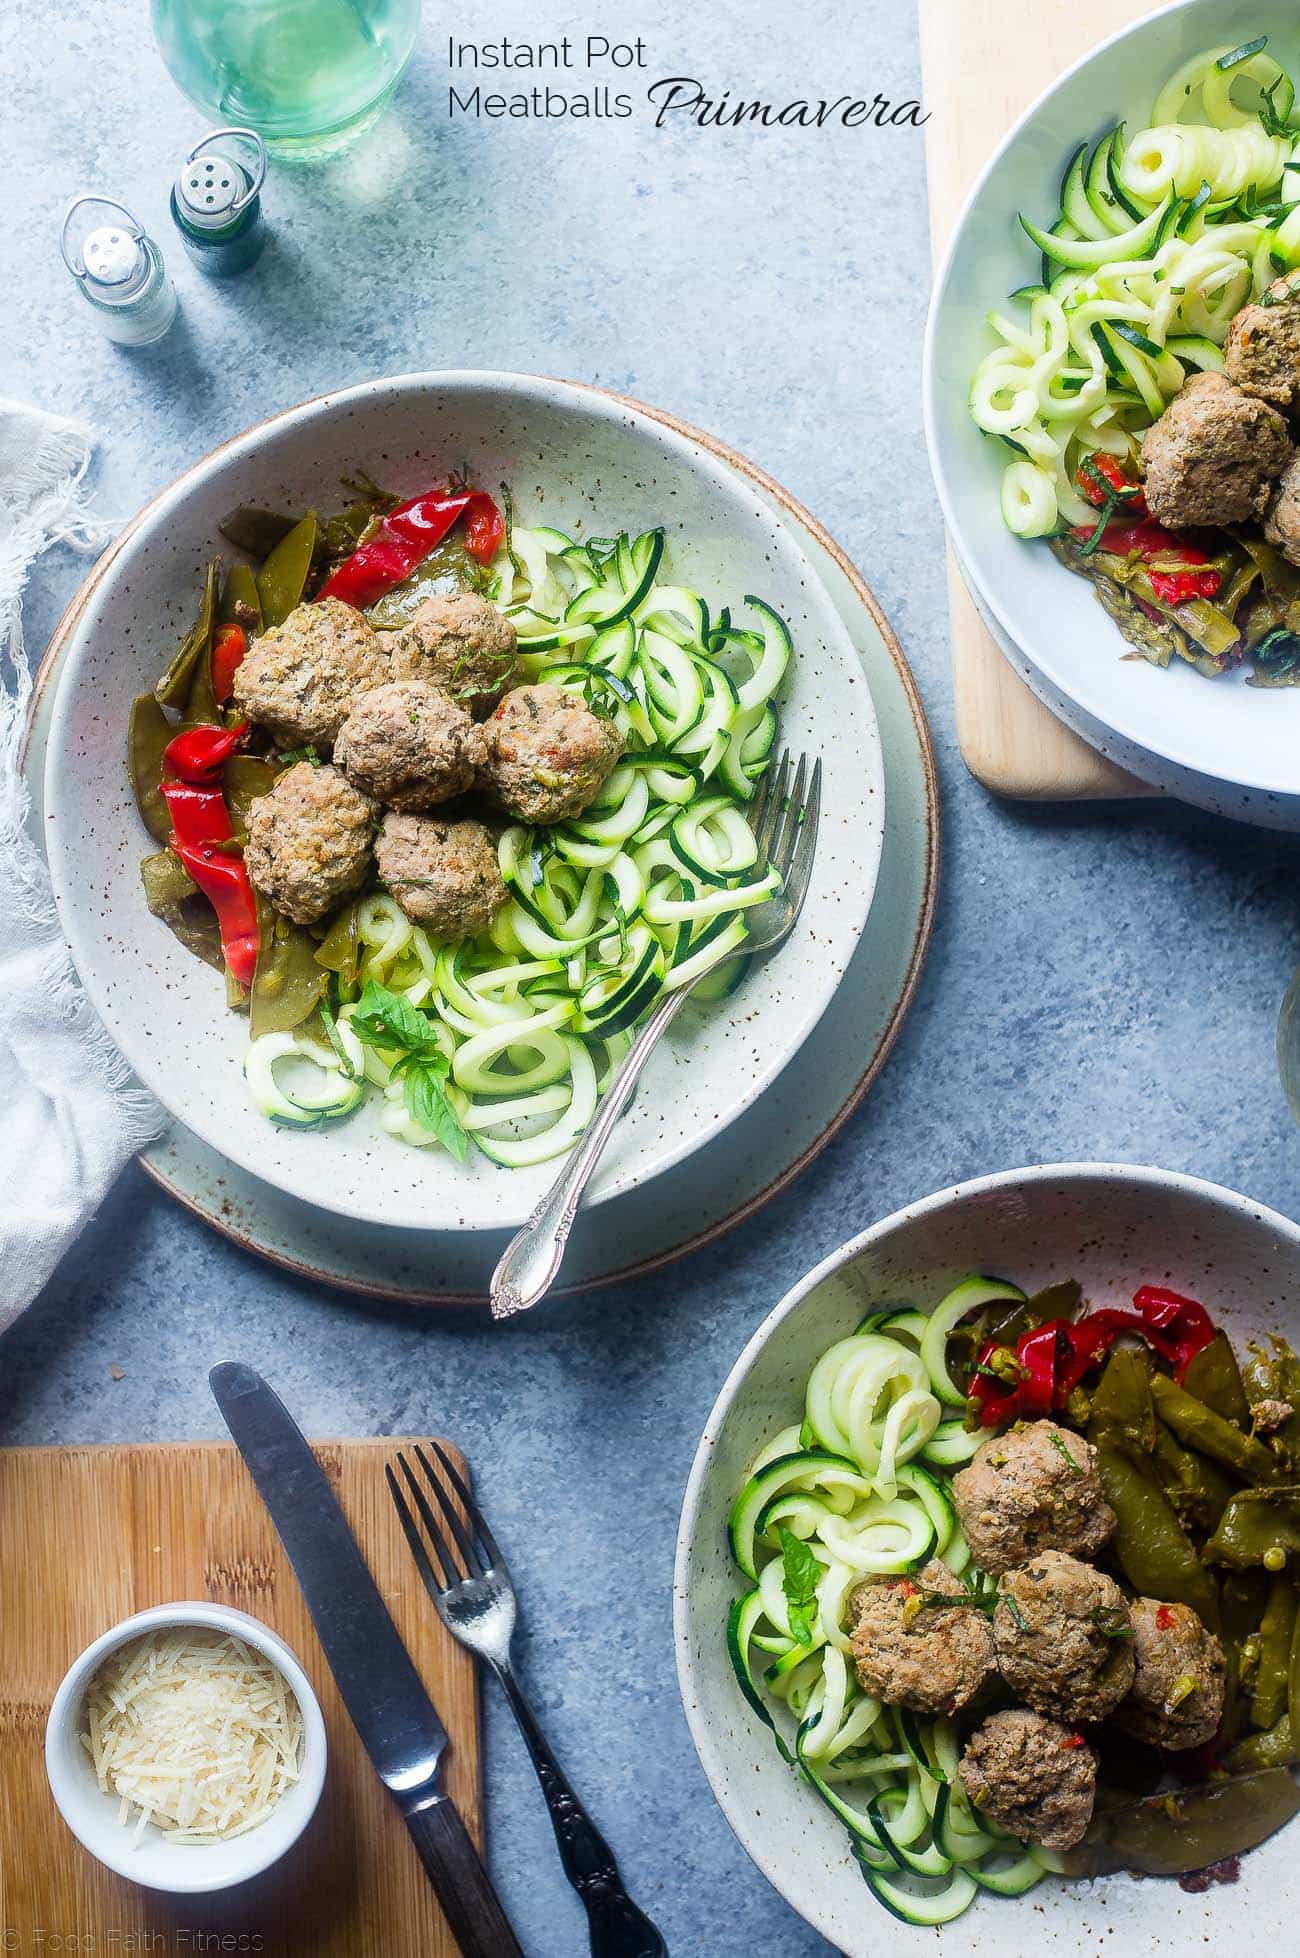 Whole30 Instant Pot Meatballs Primavera - These low carb instant pot meatballs taste like pasta primavera! They're a healthy, gluten free and paleo spring meal for only 300 calories! | Foodfaithfitness.com | @FoodFaithFit